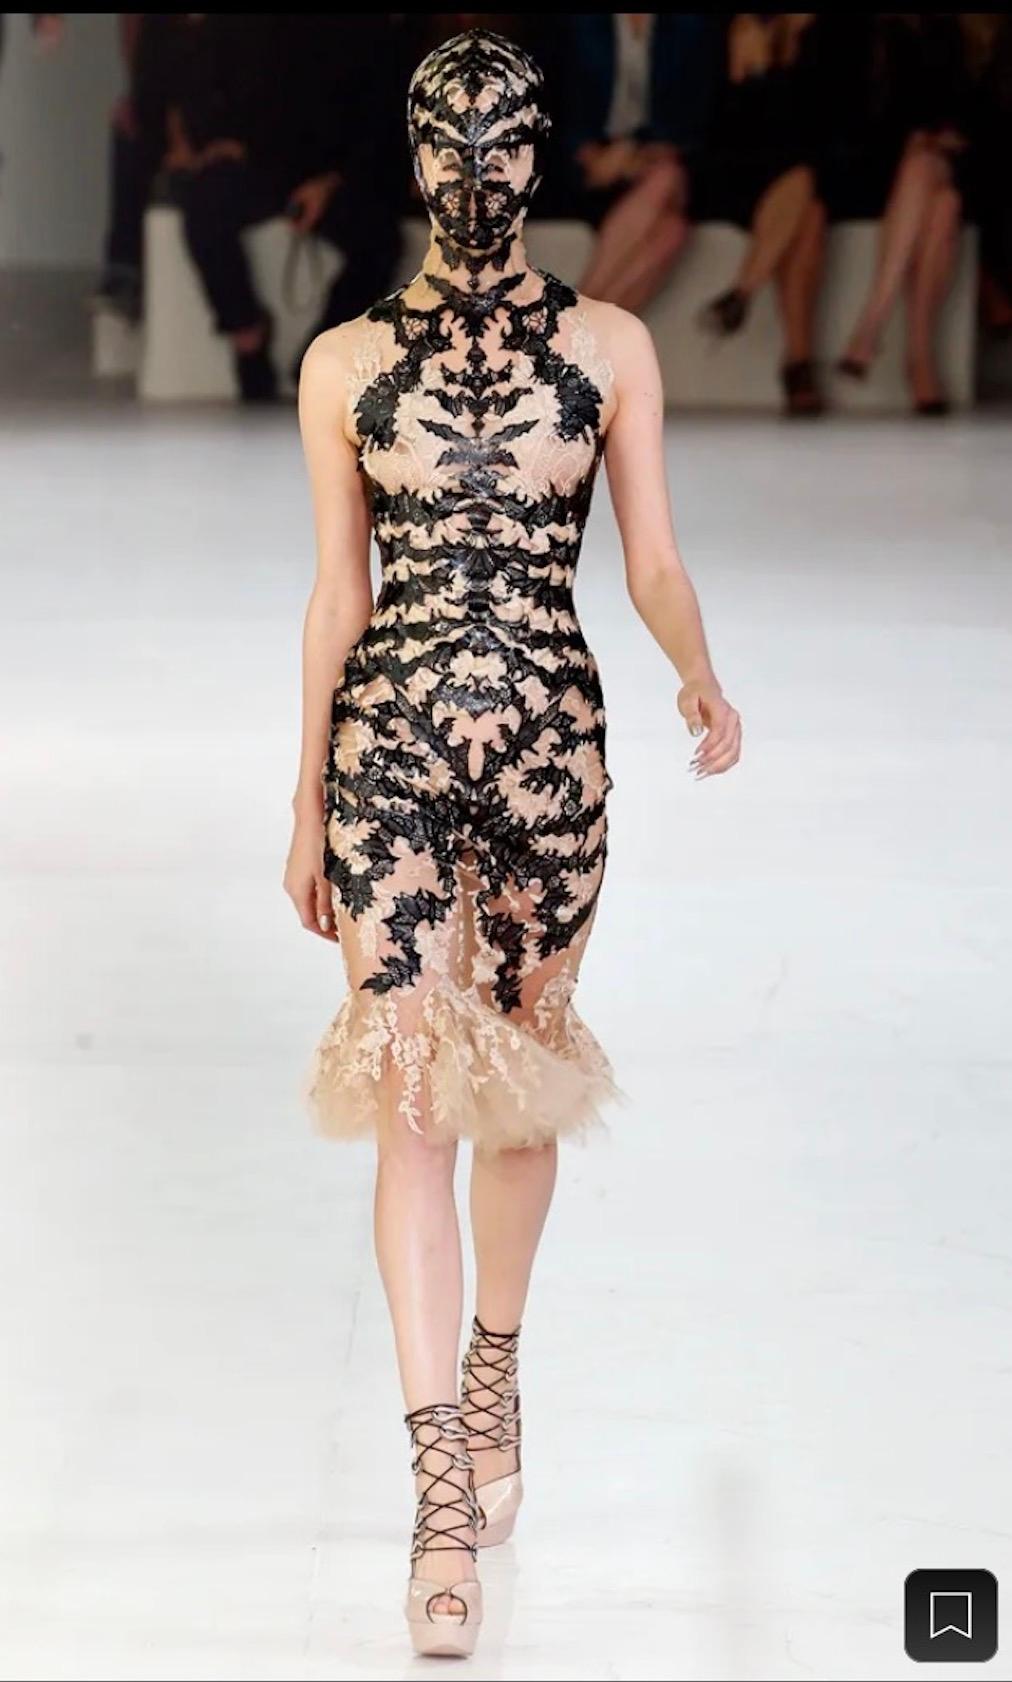 Absolutely iconic Alexander McQueen SS 2012 Laser Cut Spine Lace Dress.

Exuding an enigmatic allure that's both cutting-edge and timeless, the Laser Cut Black Leather Lace Dress from Alexander McQueen's 2012 collection is a testament to the fashion